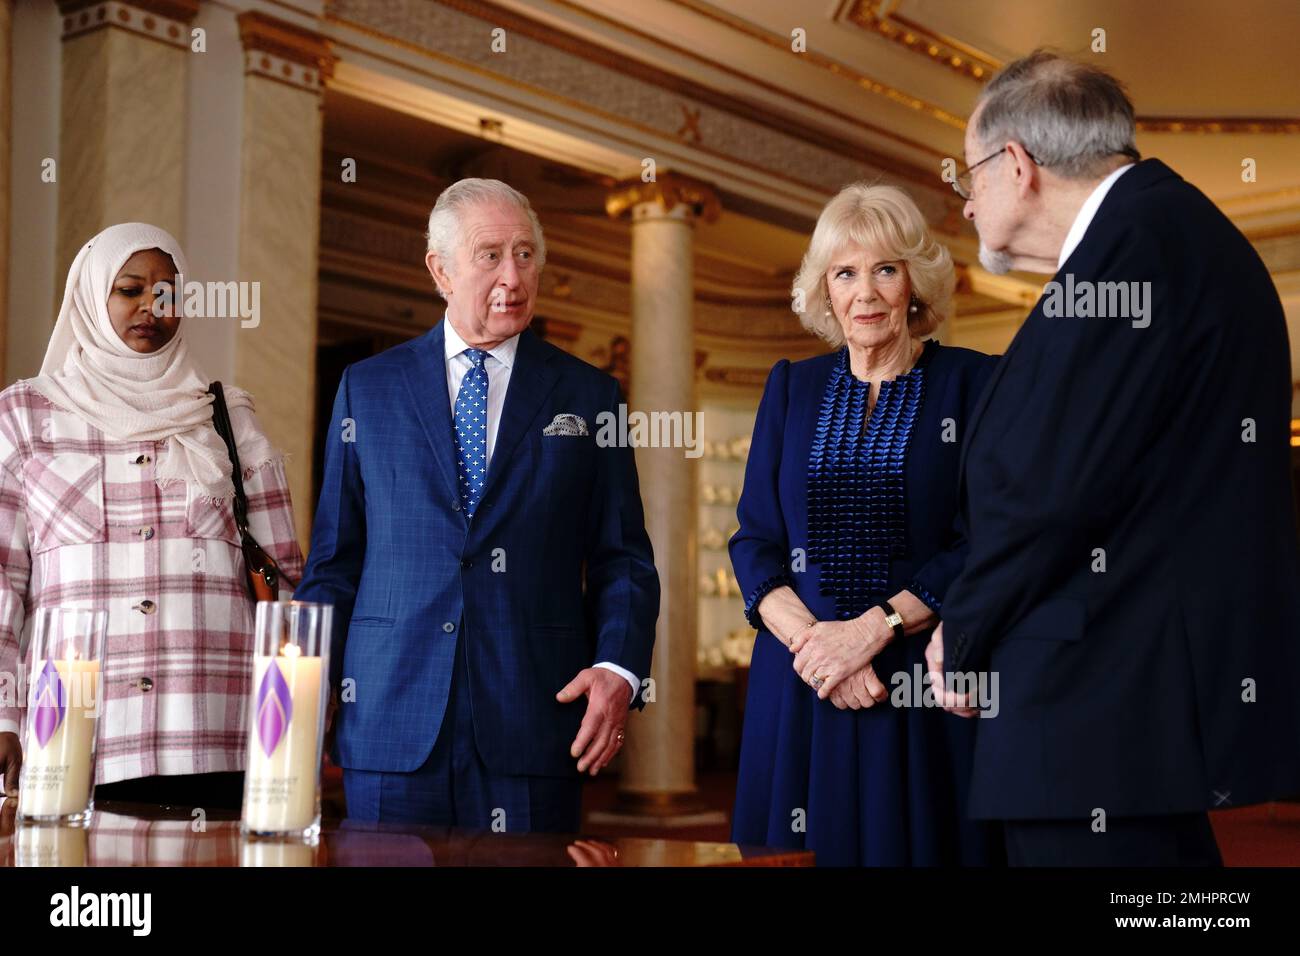 King Charles III and the Queen Consort light a candle at Buckingham Palace, London, to mark Holocaust Memorial Day, alongside Amouna Adam (left), a survivor of the Darfur genocide, and Holocaust survivor Dr Martin Stern (right). Picture date: Friday January 27, 2023. Stock Photo